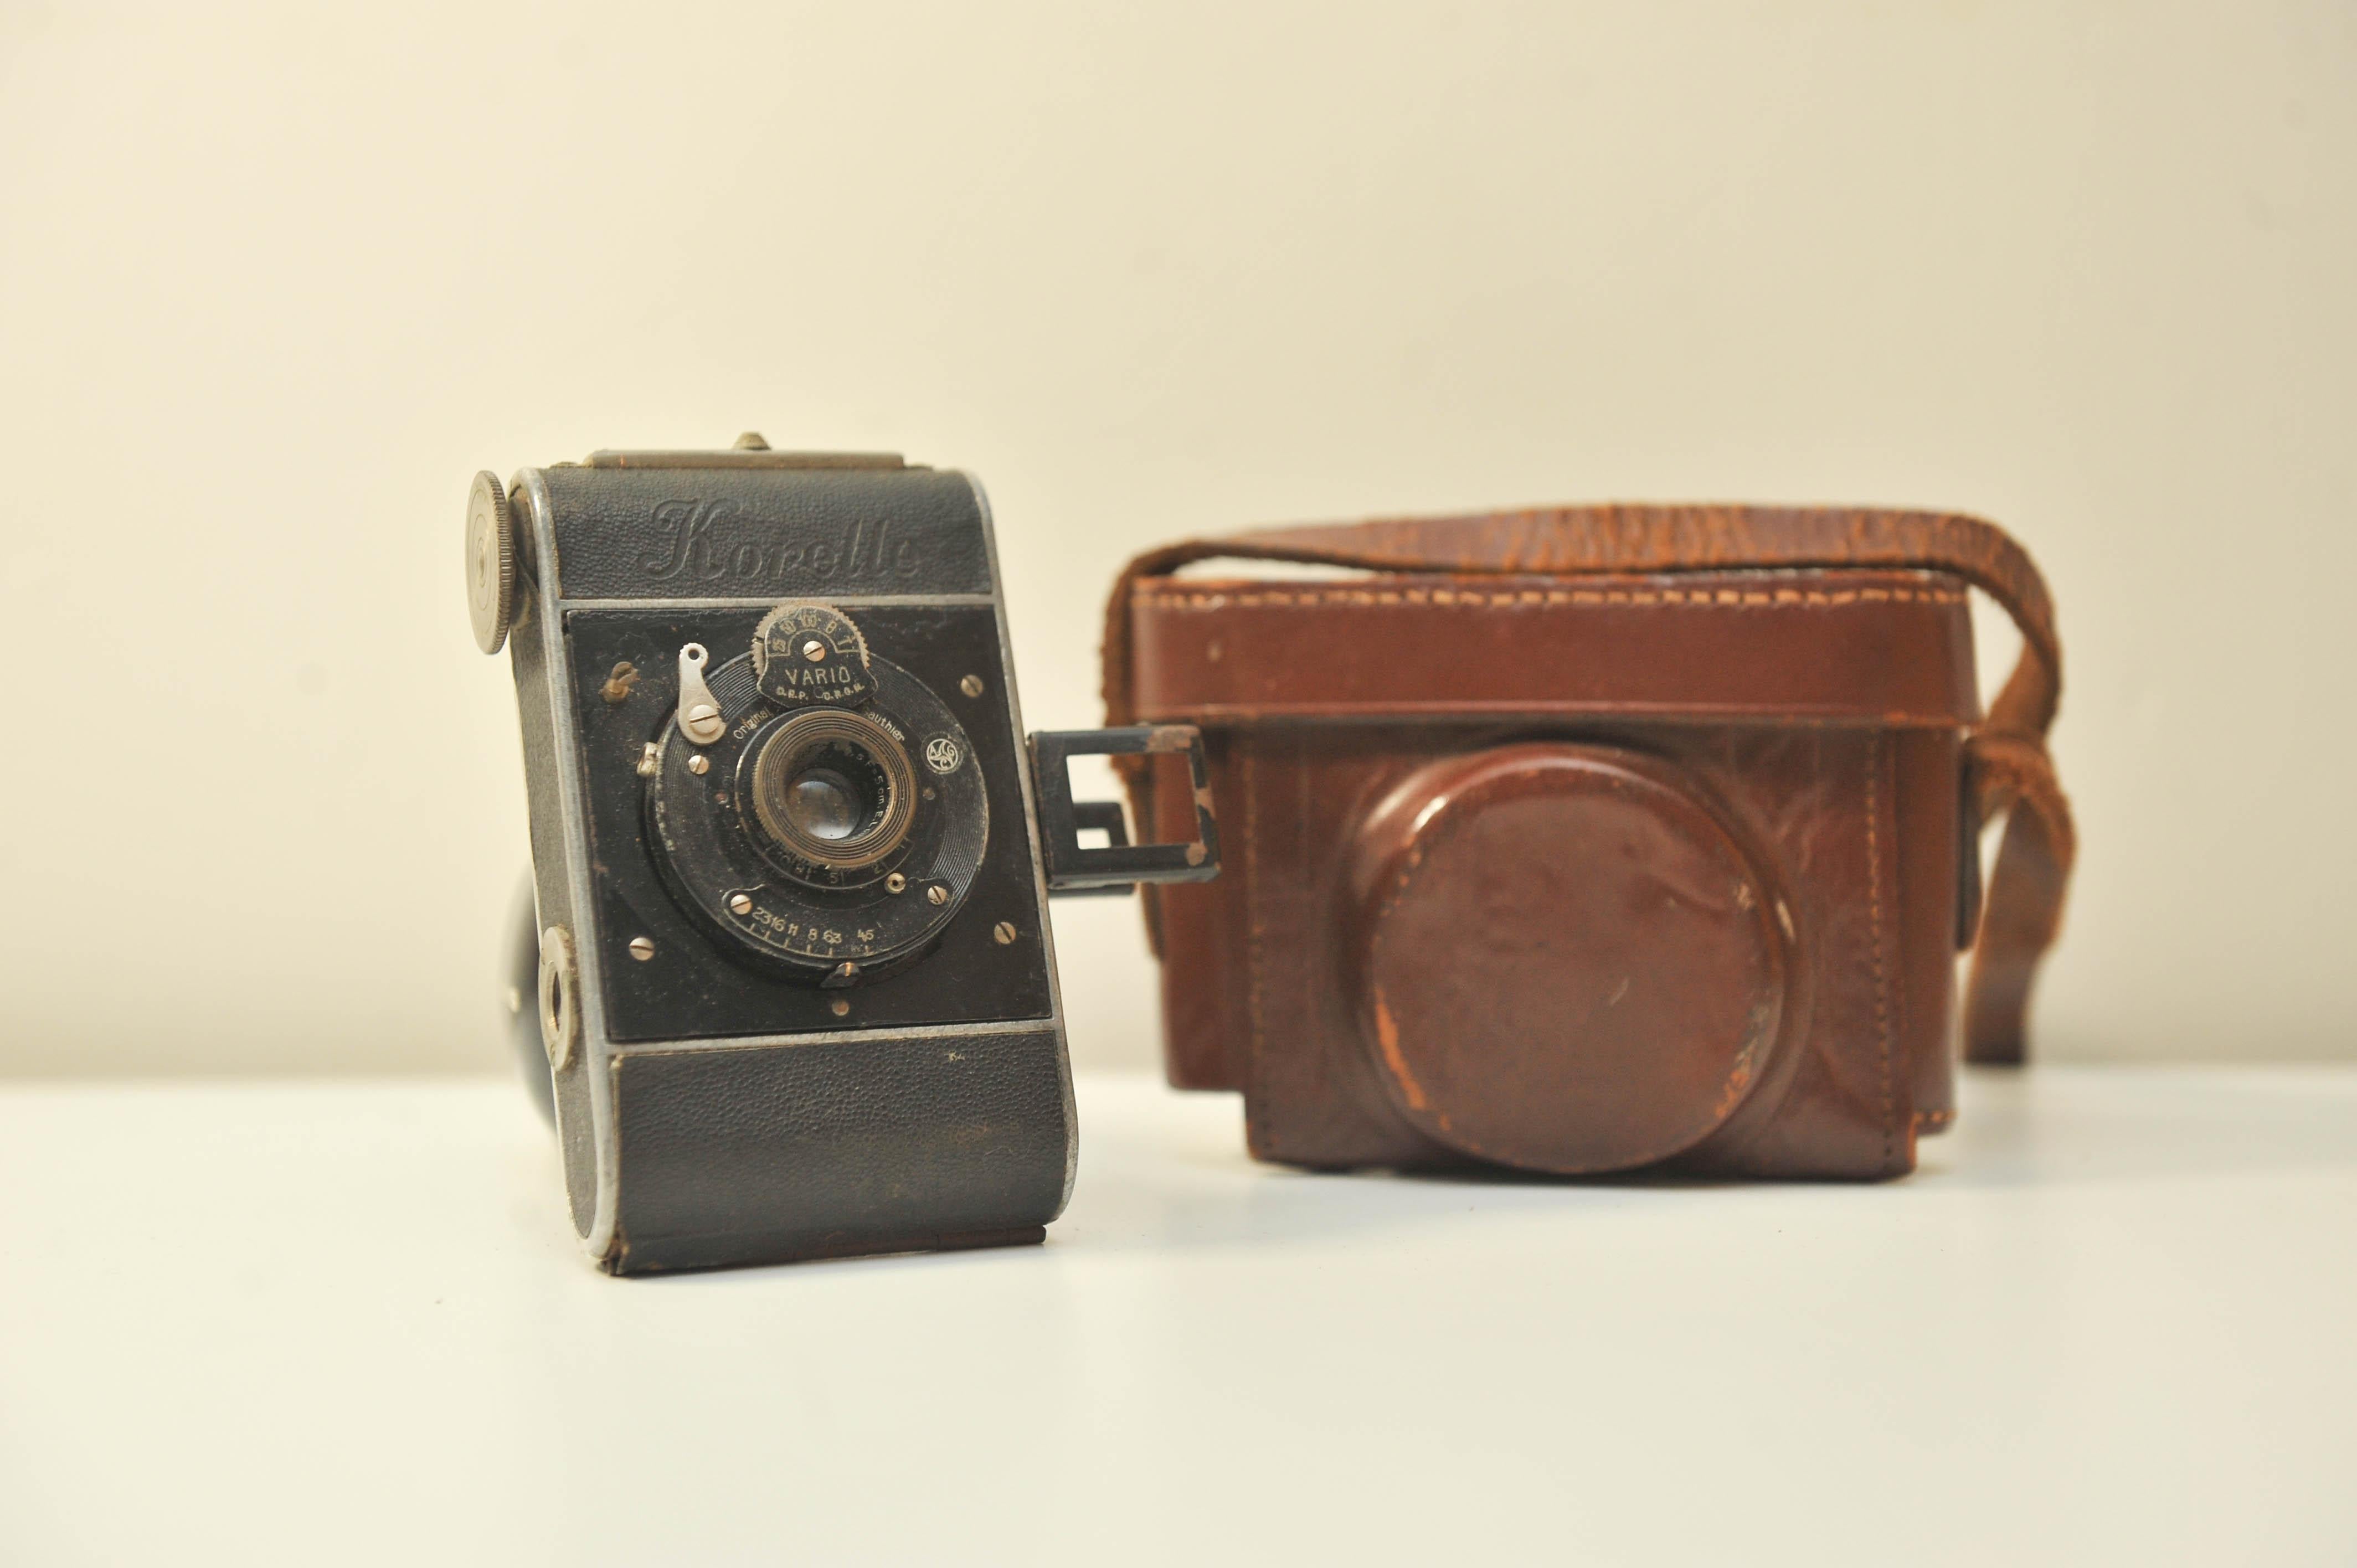 Kochmann Korelle Camera with Vario Leaf Shutter by Gauthier

Awesome historical camera and case in original condition

Make: Kochmann I Vario: leaf shutter I Made: Pre WWII Germany I Film: 127 film
Era: 1930's

The Vario is a long-lived series of